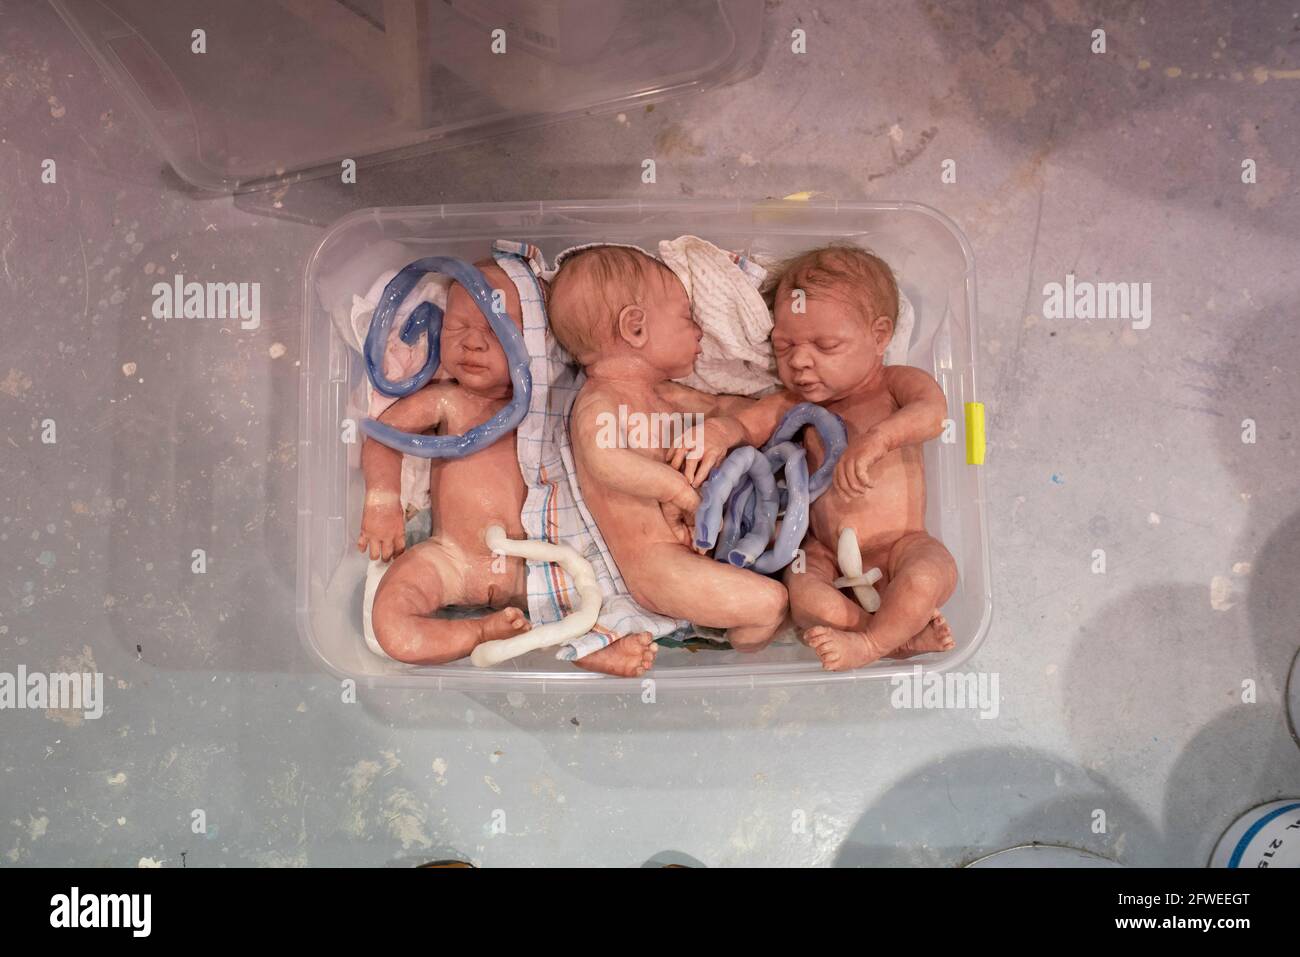 France, Paris, 2019-12-11. Ciné-bébé is a workshop specialized in hyper-realistic replicas of babies for the cinema. They make babies and newborns for Stock Photo